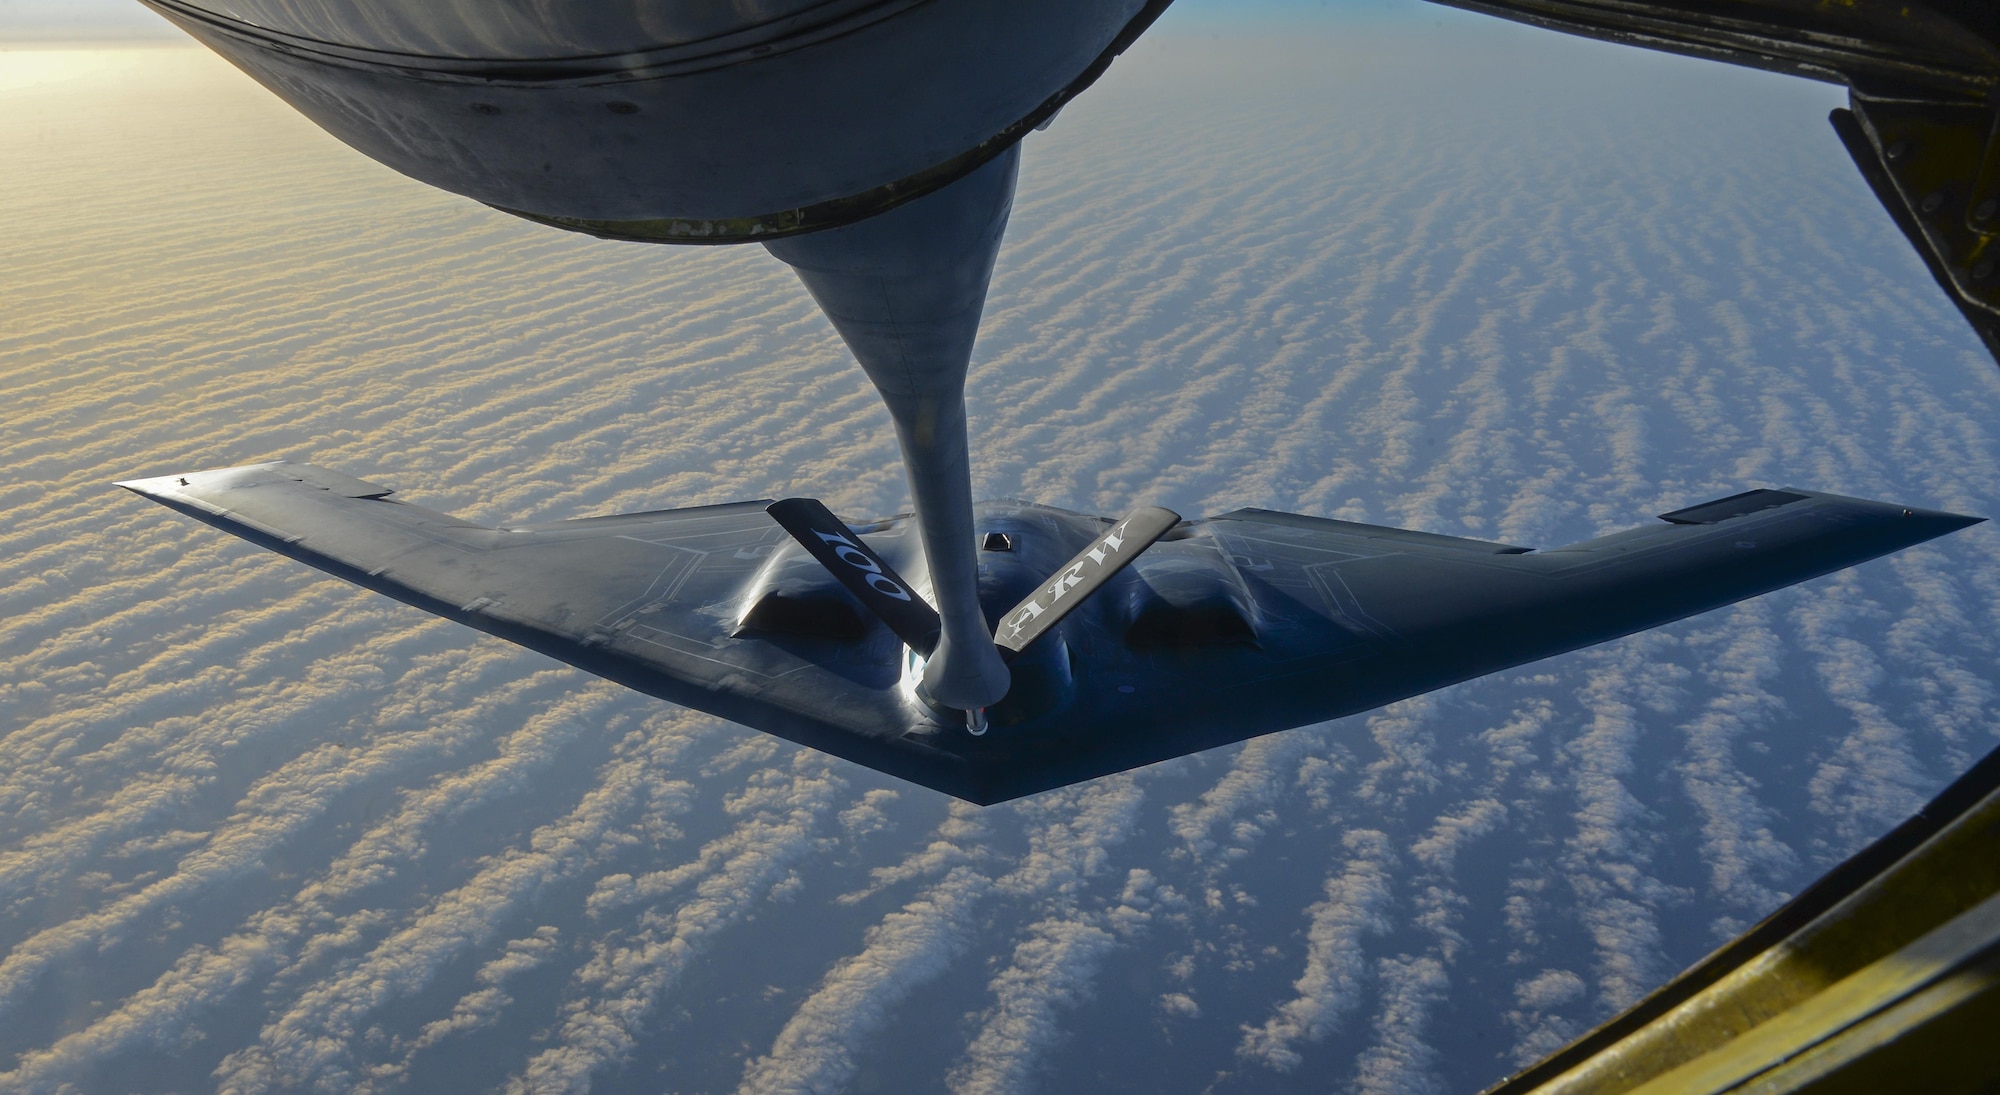 A U.S. Air Force KC-135 Stratotanker assigned to the 100th Air Refueling Wing, RAF Mildenhall, England, prepares to transfer fuel to a B-2 Spirit from Whiteman Air Force Base, Mo., off the coast of Spain, June 13, 2017. Two B-2s deployed to the U.K. to participate in theater bomber assurance and deterrence operations. Bomber deployments enhance the readiness and training necessary to respond to any contingency or challenge across the globe. (U.S. Air Force photo by Staff Sgt. Micaiah Anthony)